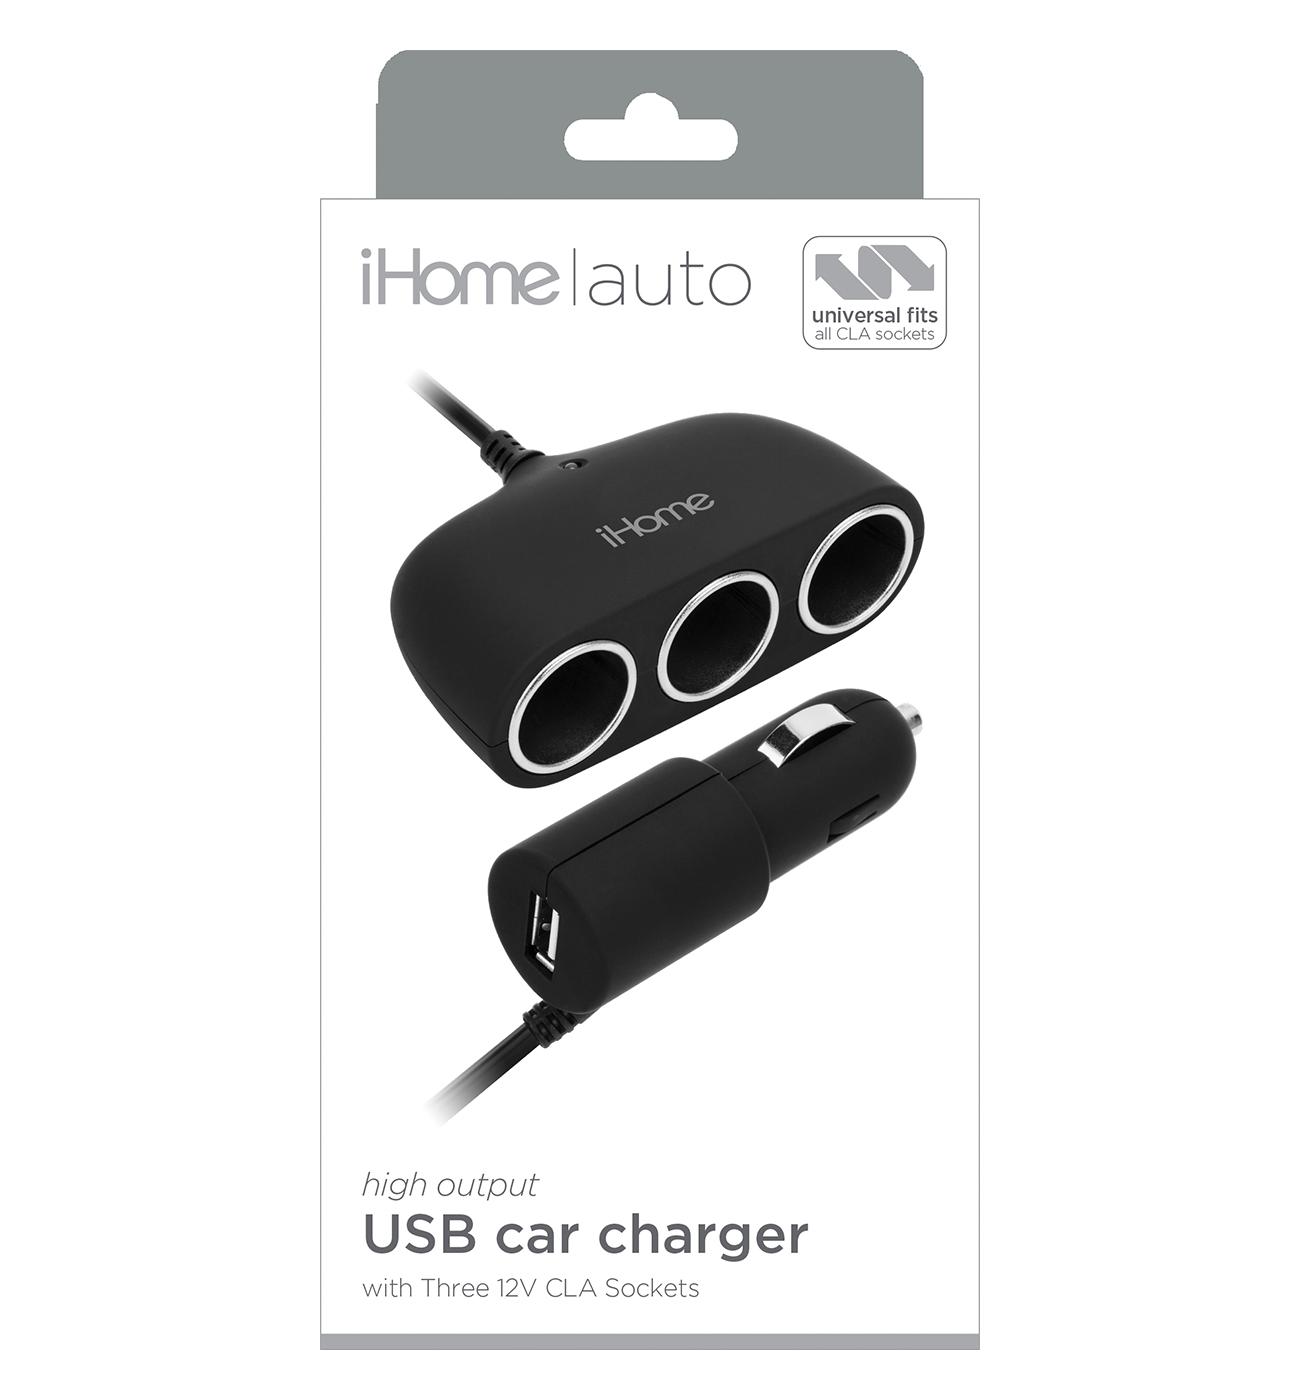 iHome Auto USB Car Charger - Black; image 1 of 2